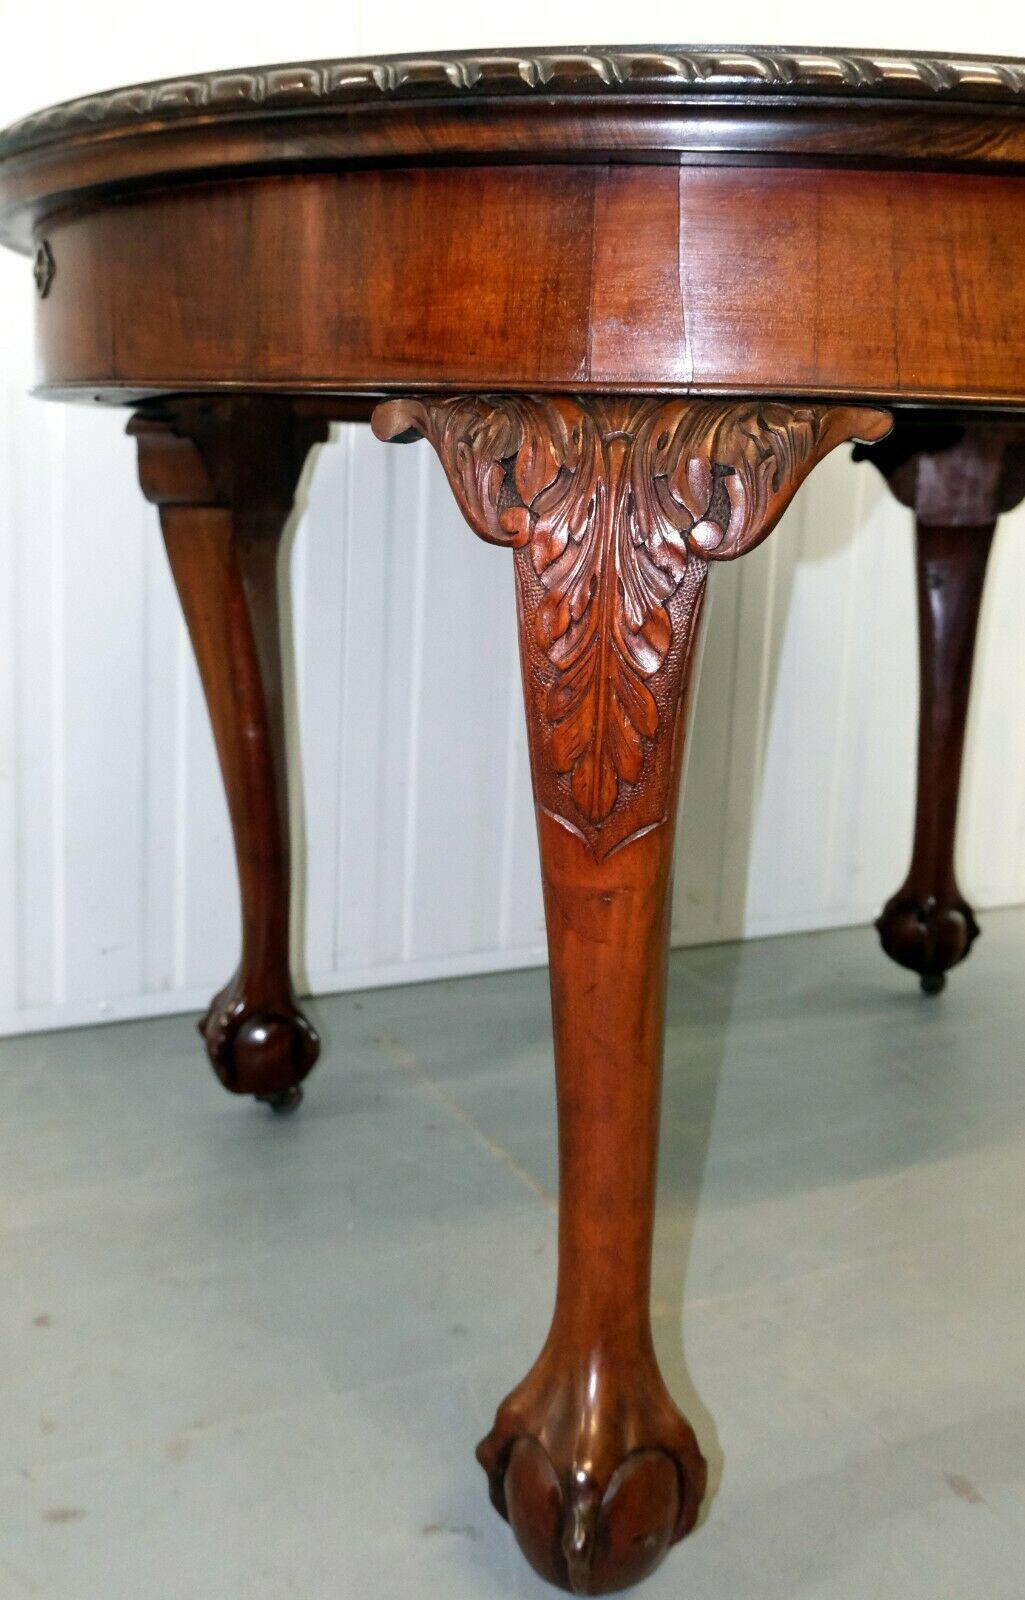 Hand-Crafted Hardwood Extending Dining Table One Leaf Cabriole Legs with Claw & Ball Feet